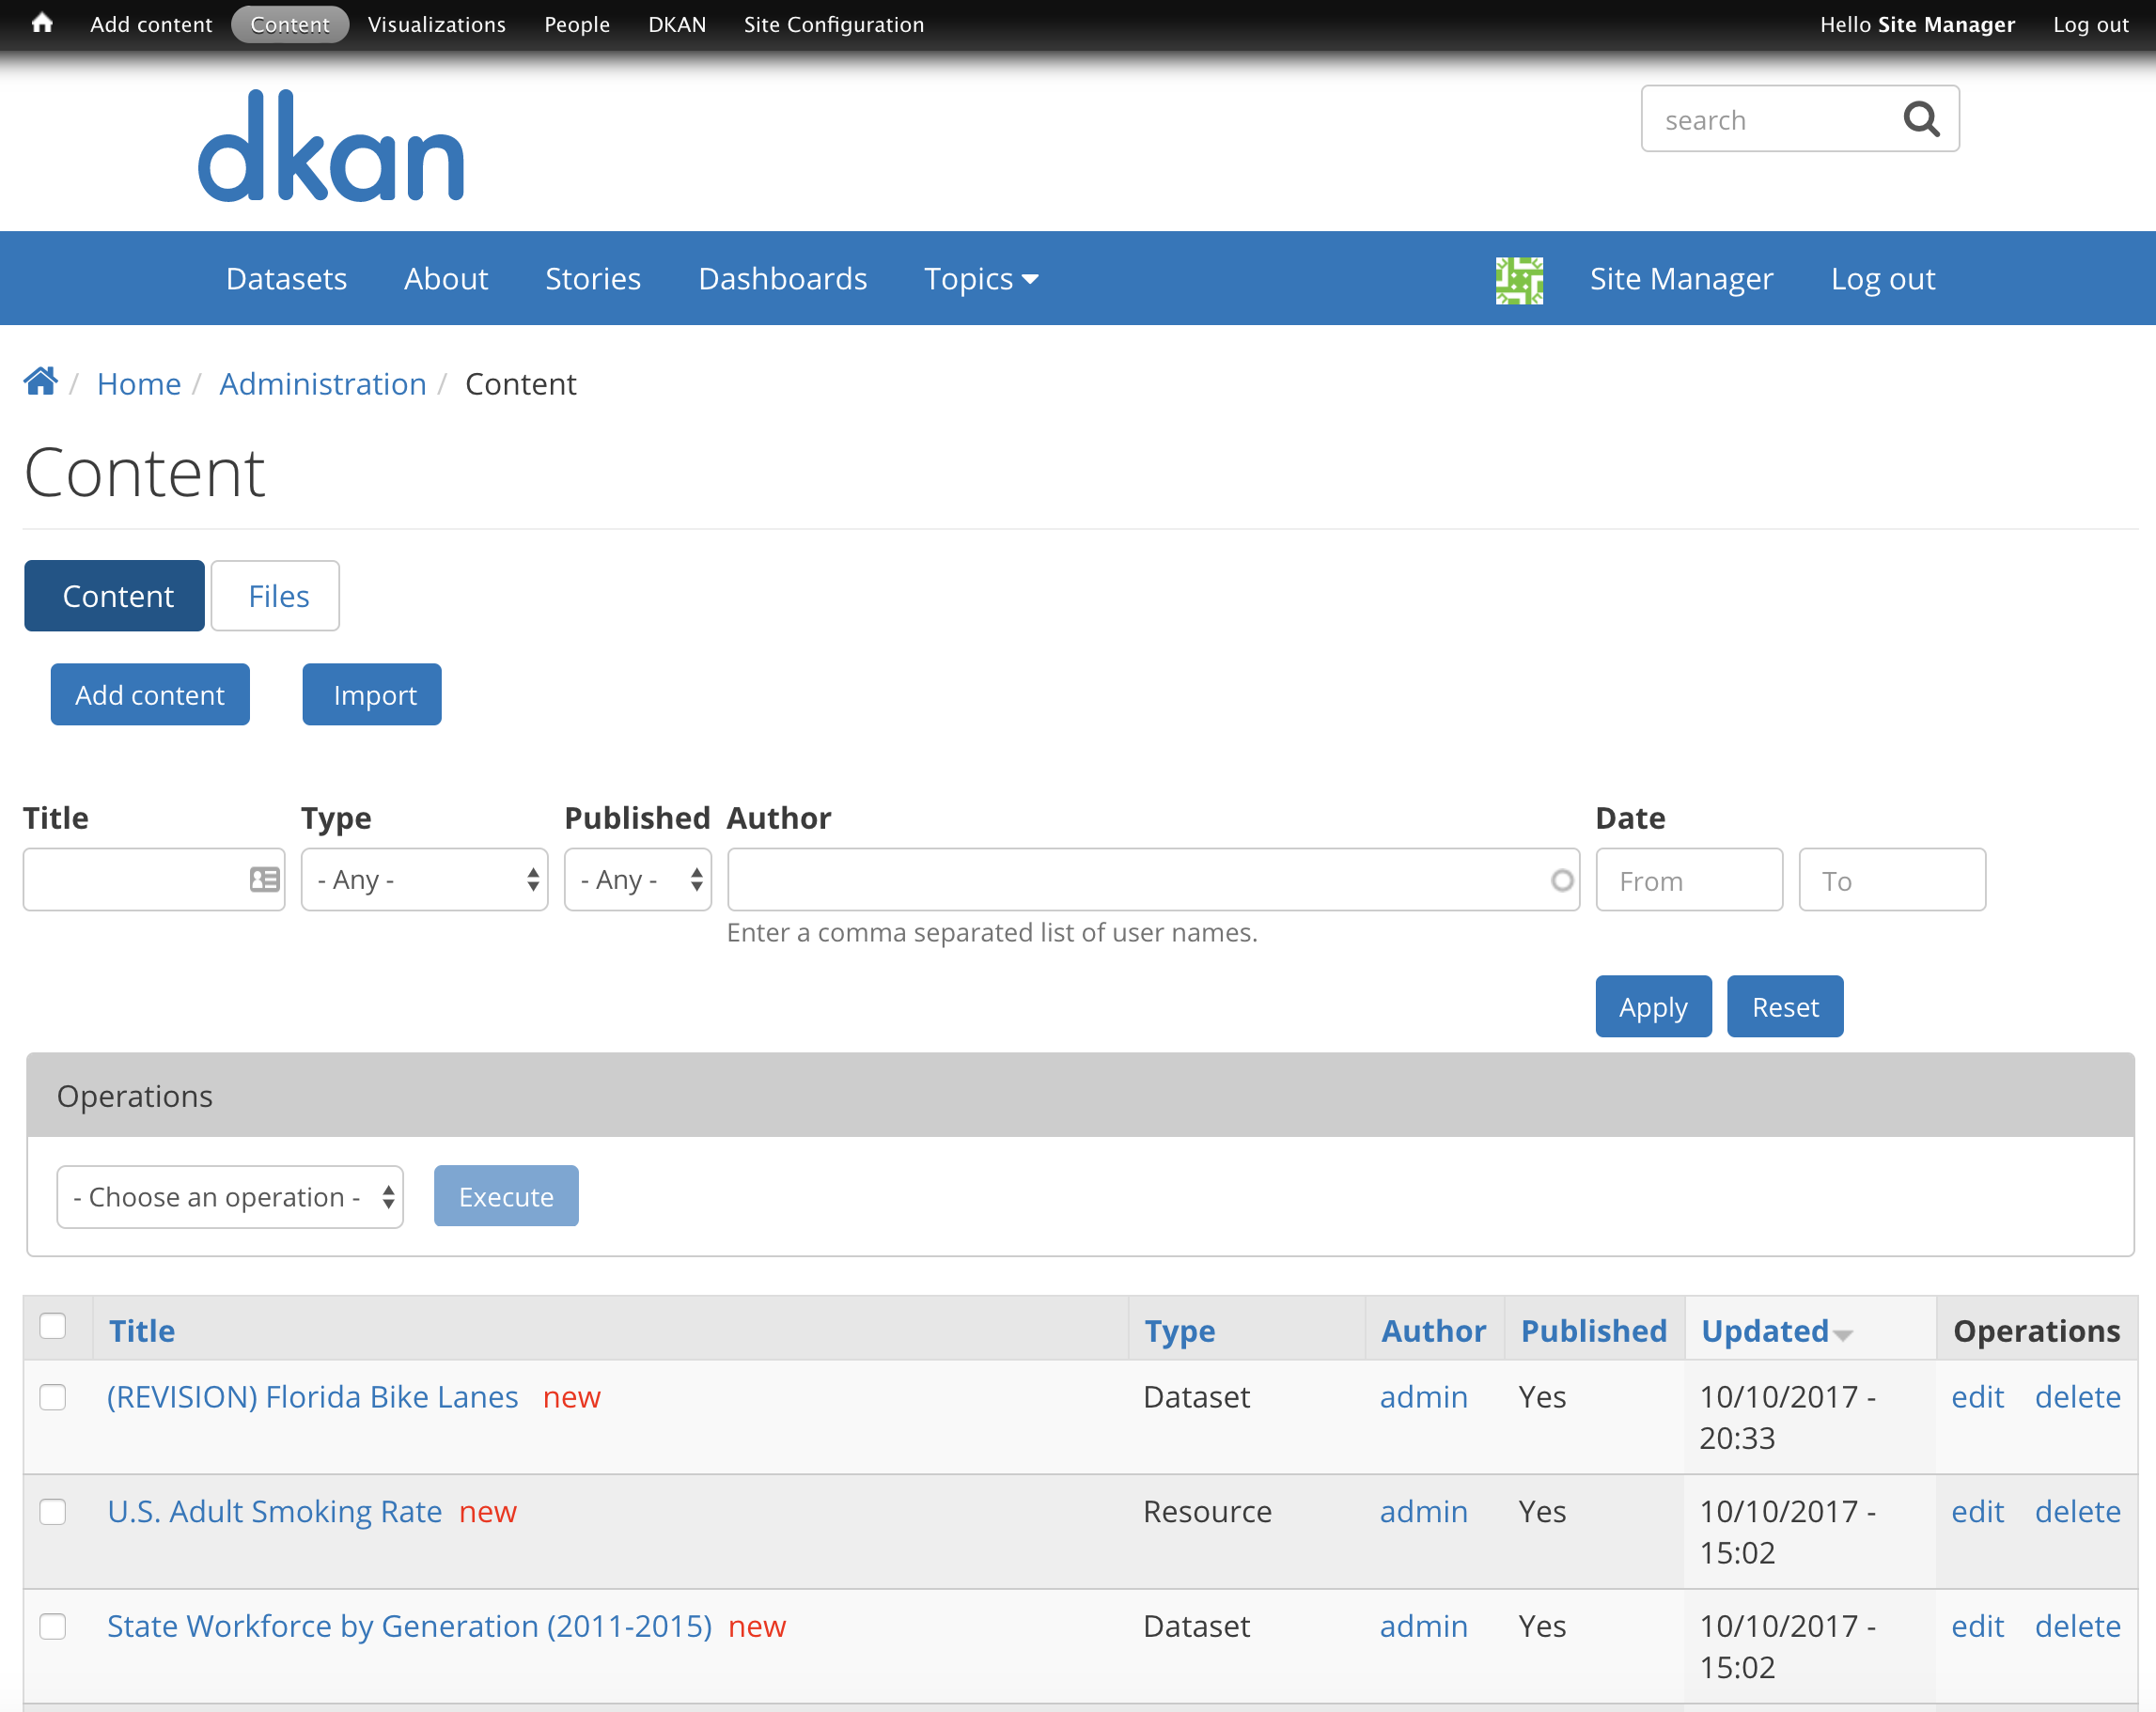 A screenshot of the DKAN "Content" page, as seen by a Site Manager.